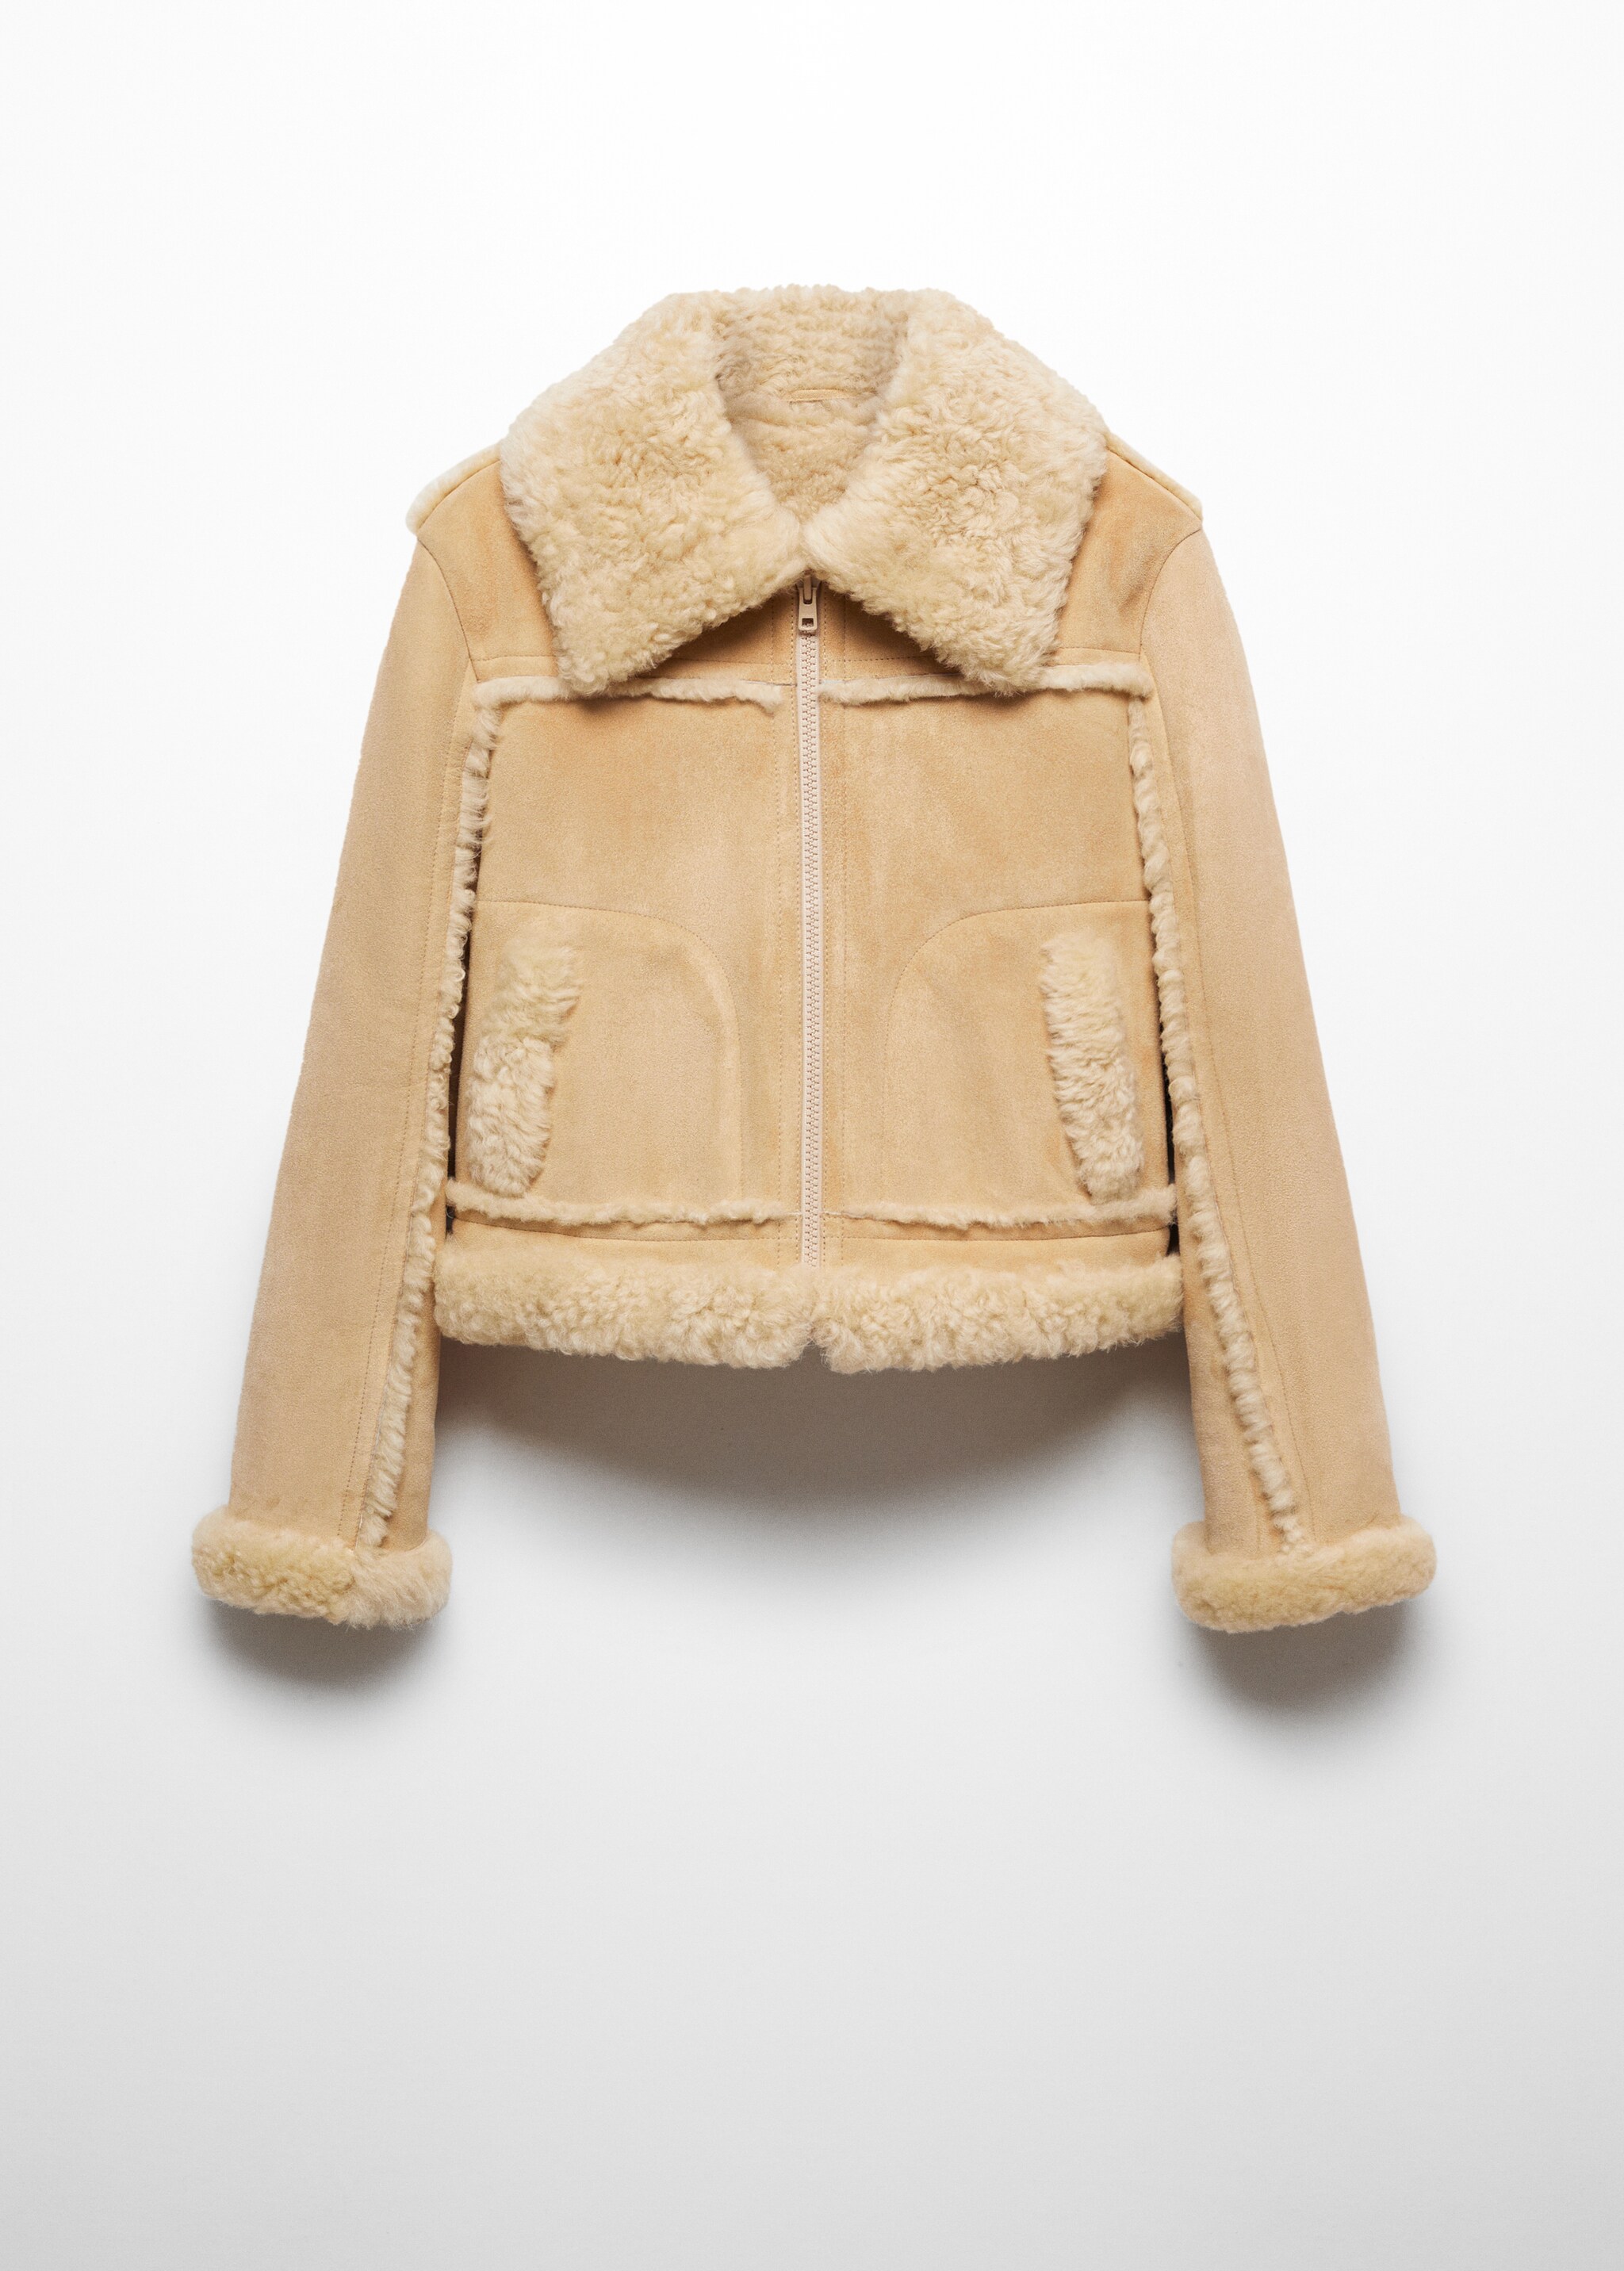 Shearling-lined leather jacket - Article without model